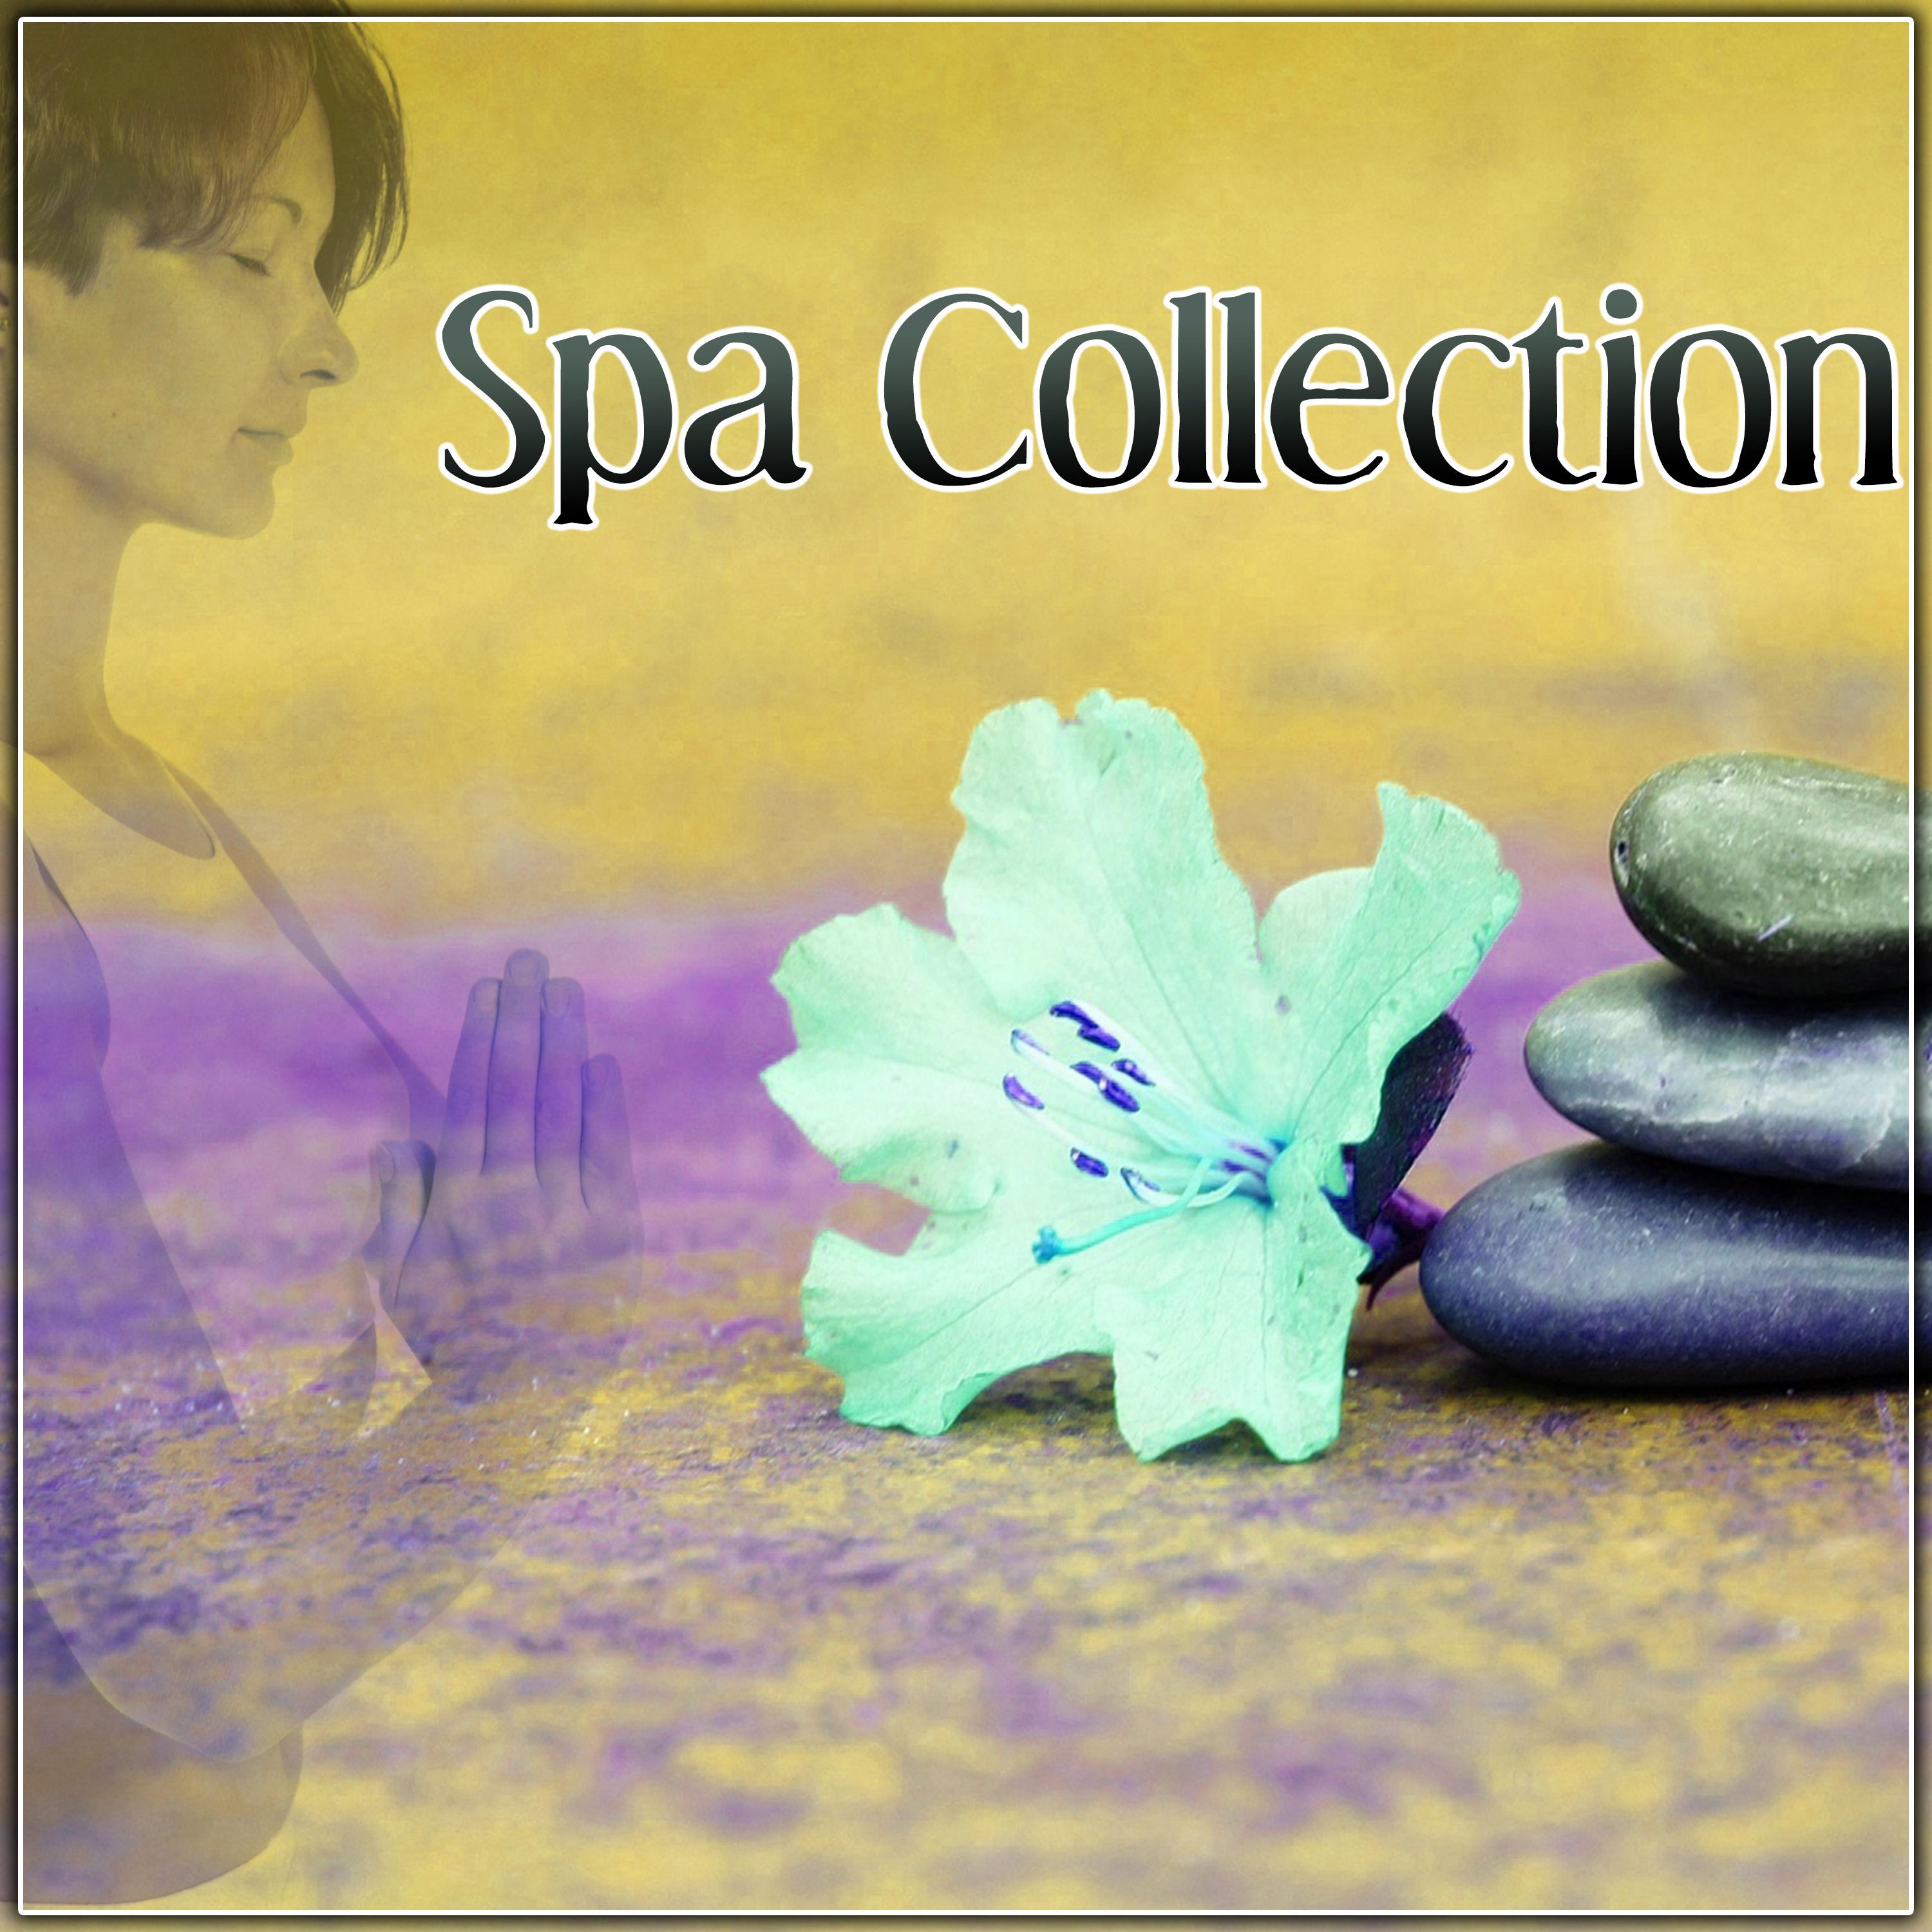 Spa Collection  Calmness Music for Relaxing Time, Spa  Wellness, Pure Relaxation, Massage Therapy, Nature Sounds